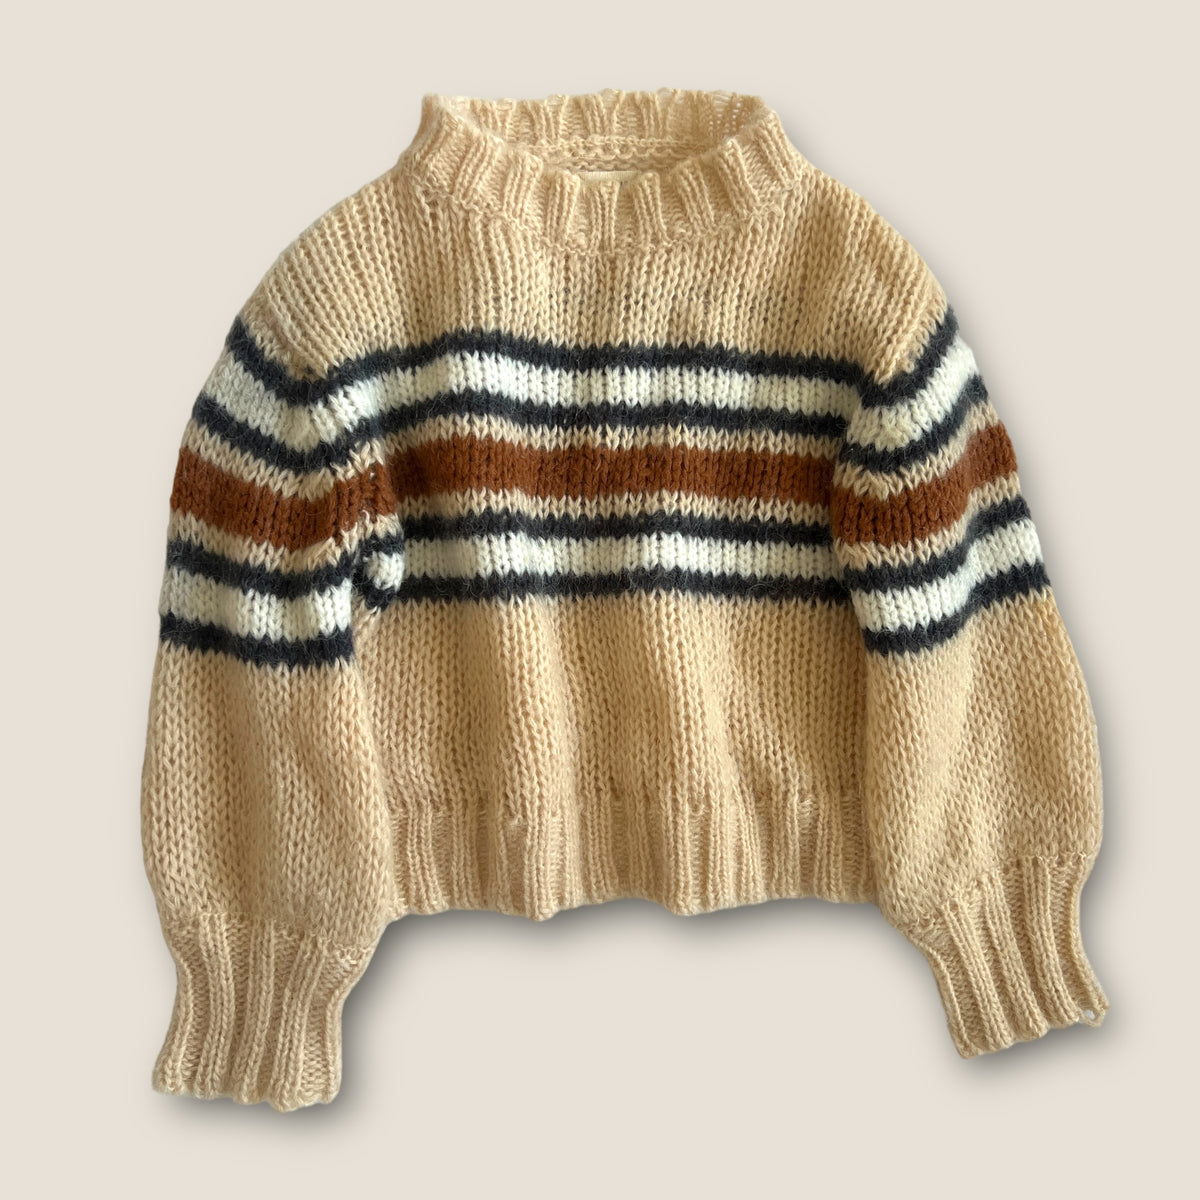 Long Live The Queen Wool Jumper size 5-6 years